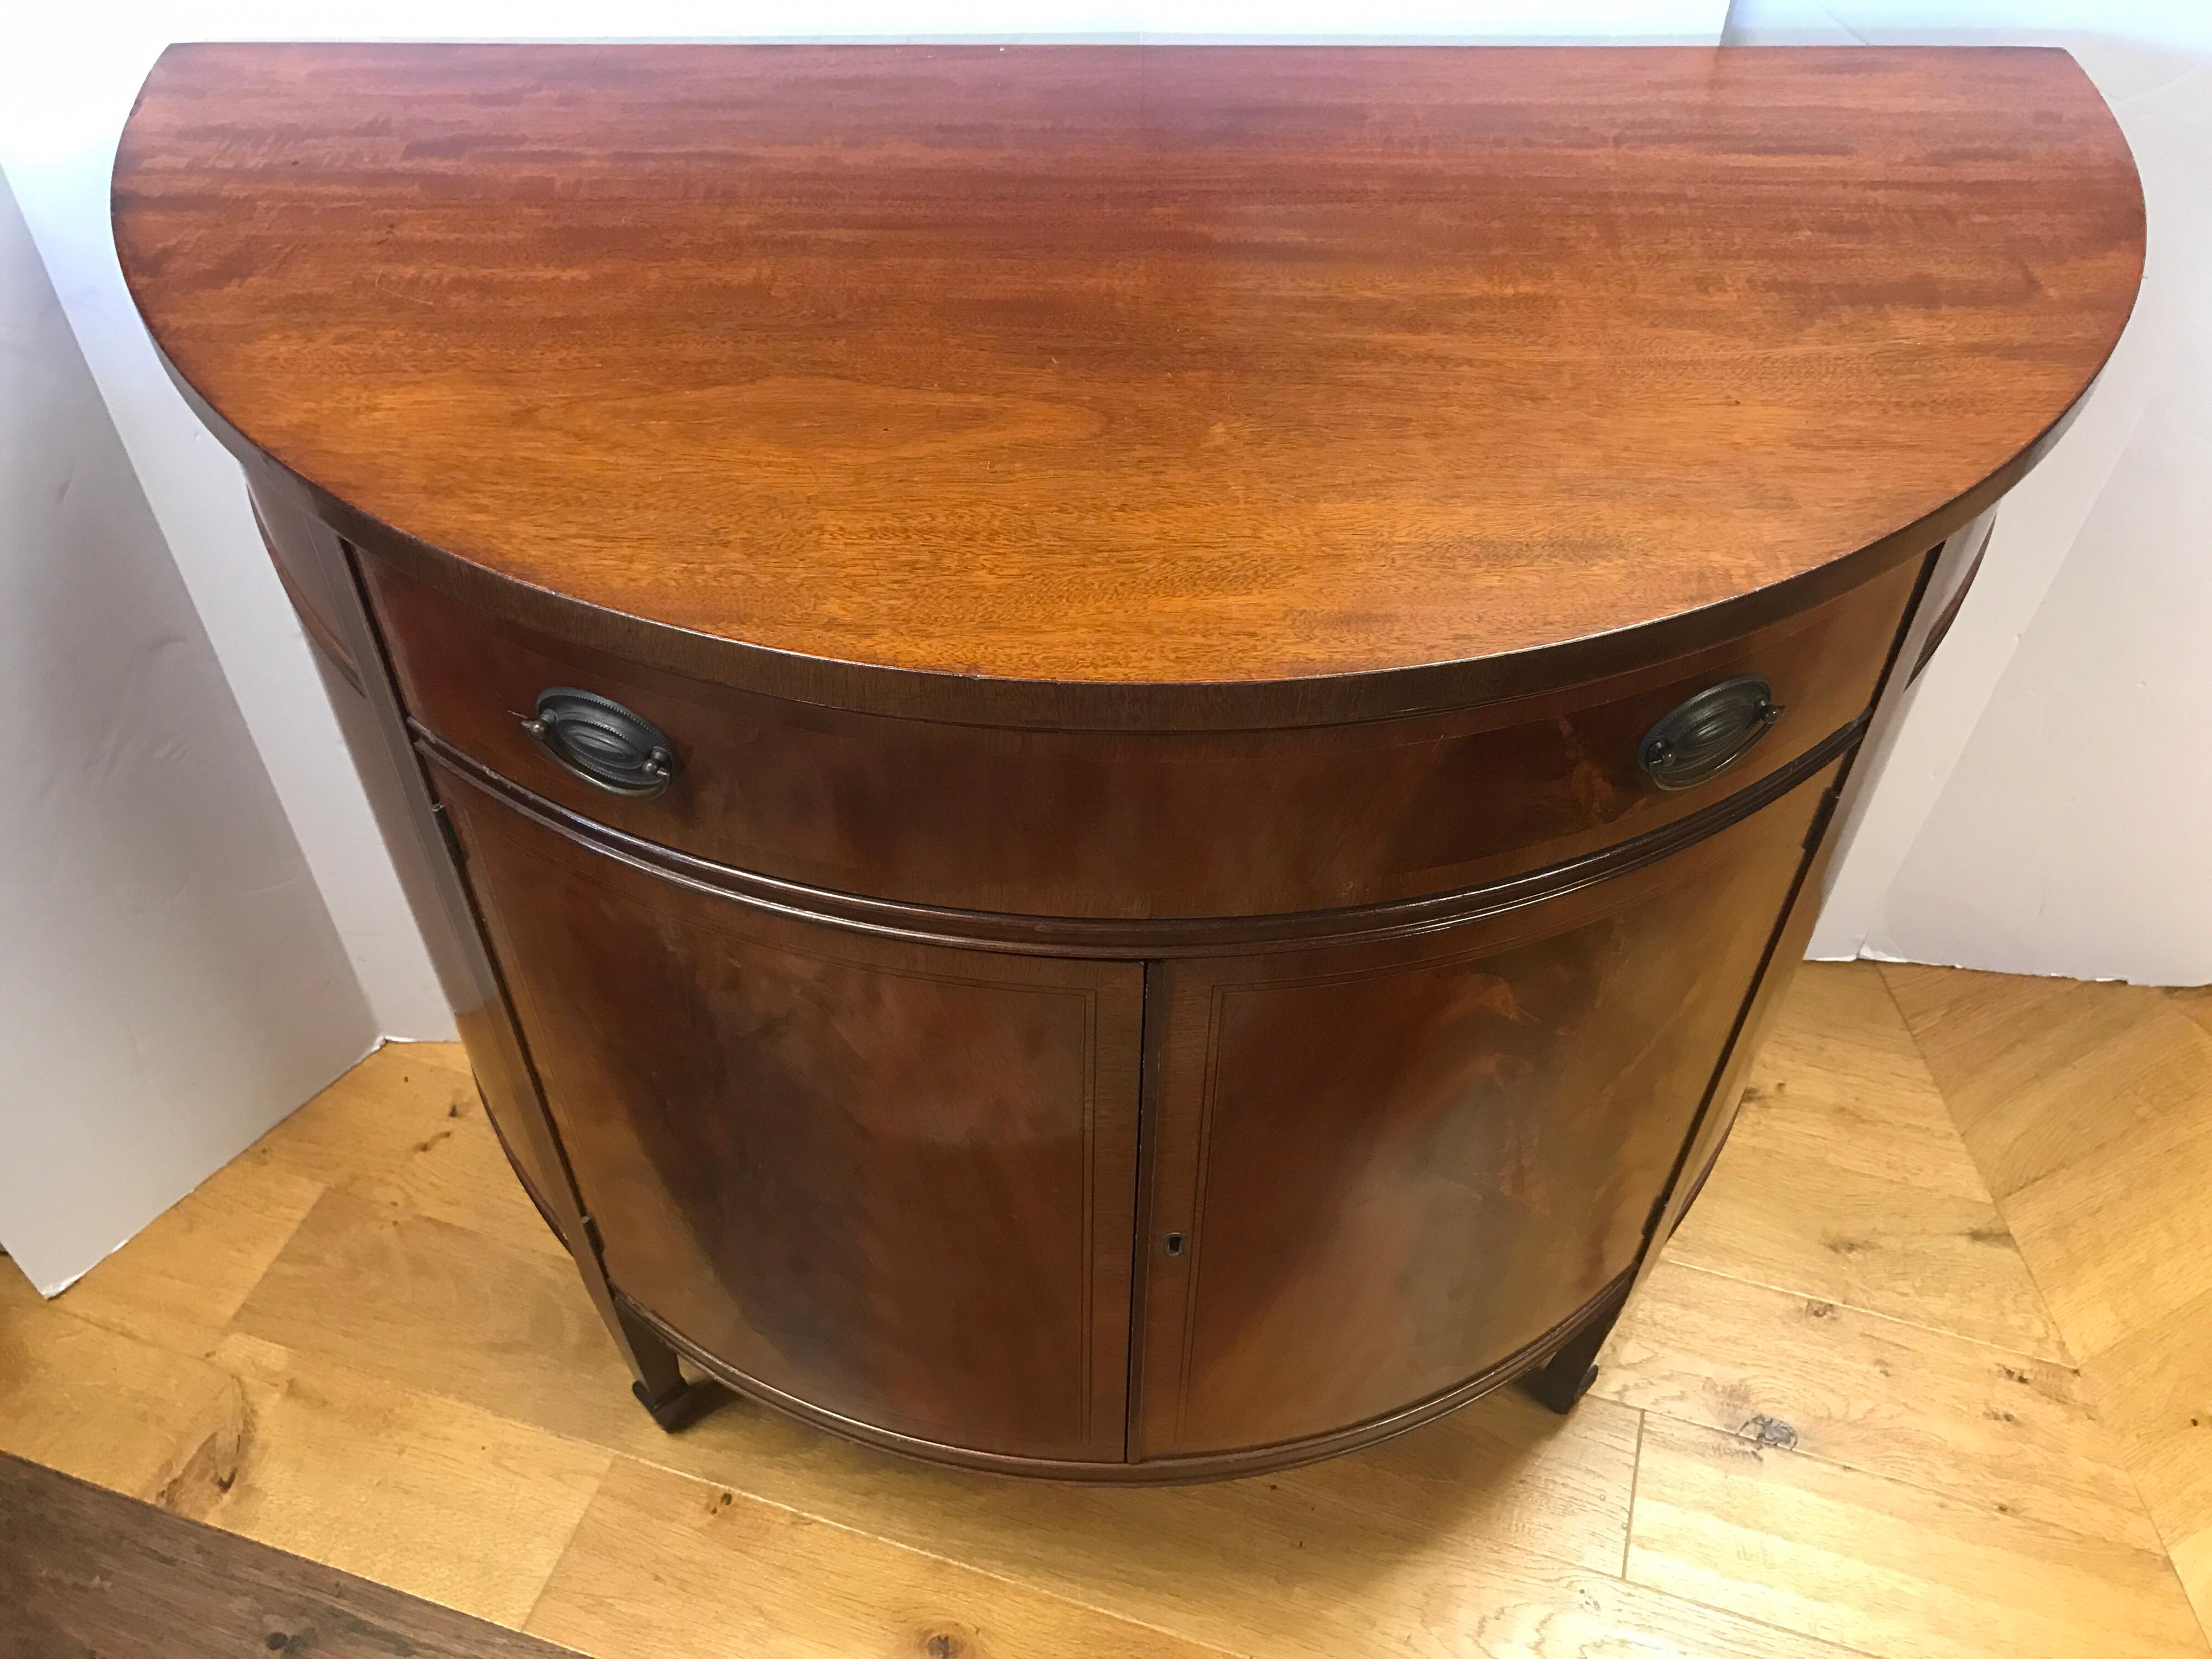 Flame mahogany demilune liquor cabinet features ebonized banding and satinwood inlay. It has one top drawer and two front doors that open to two shelves. Has working lock and key. Made by famed Johnson Furniture Company and hallmarked as such.